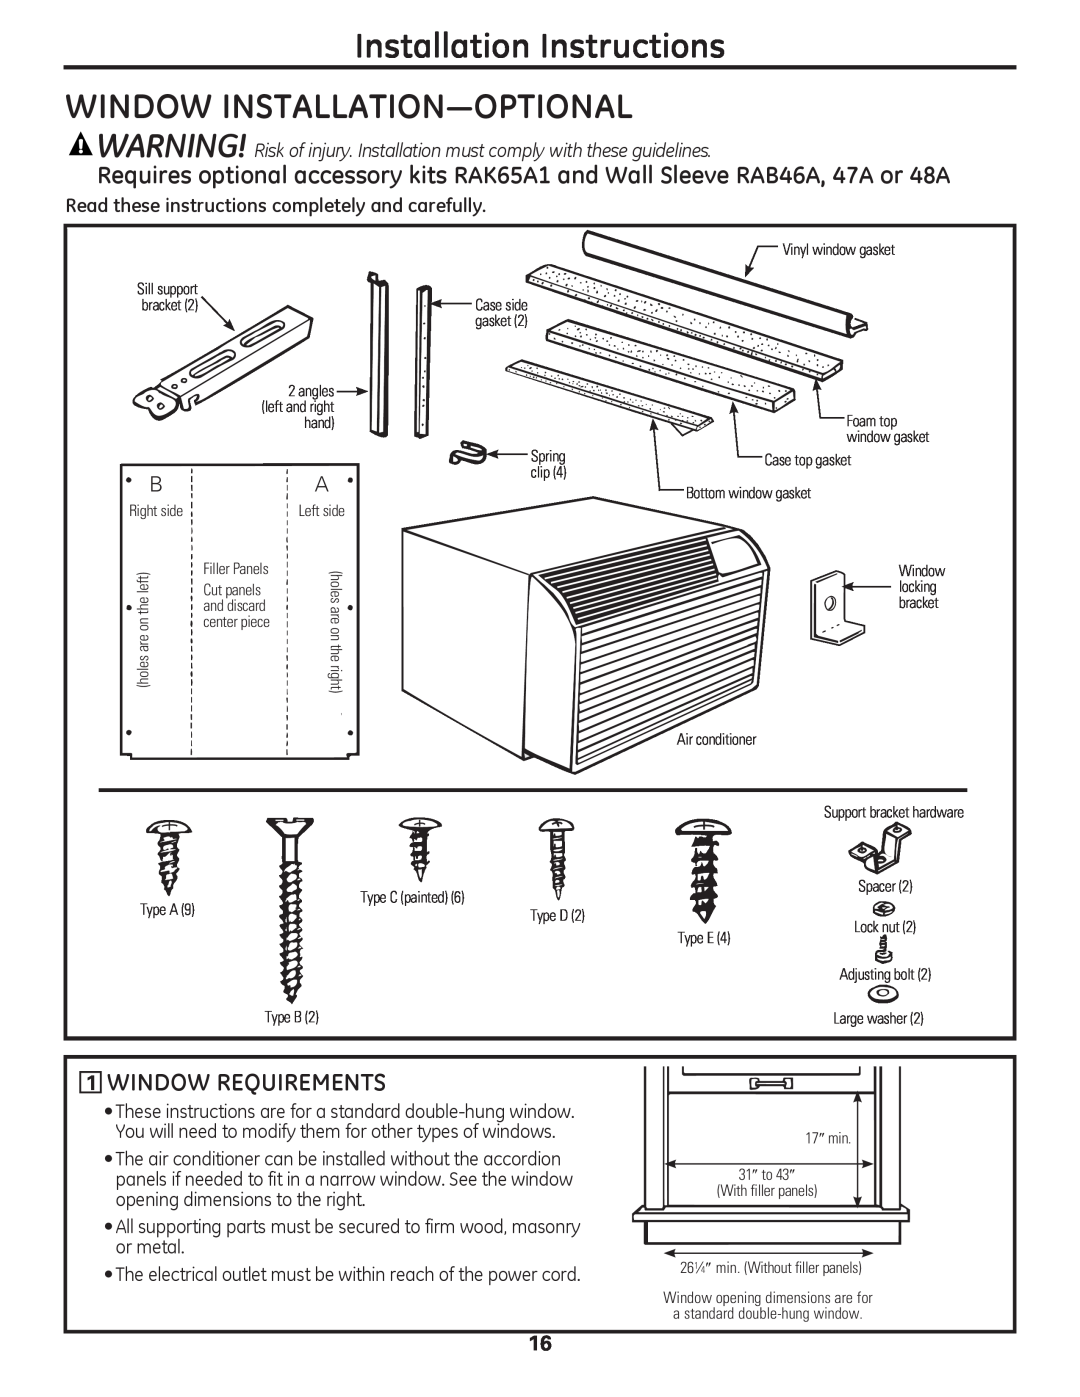 GE AJCM 08 ACD installation instructions Window Installation-Optional, Window Requirements, Installation Instructions 